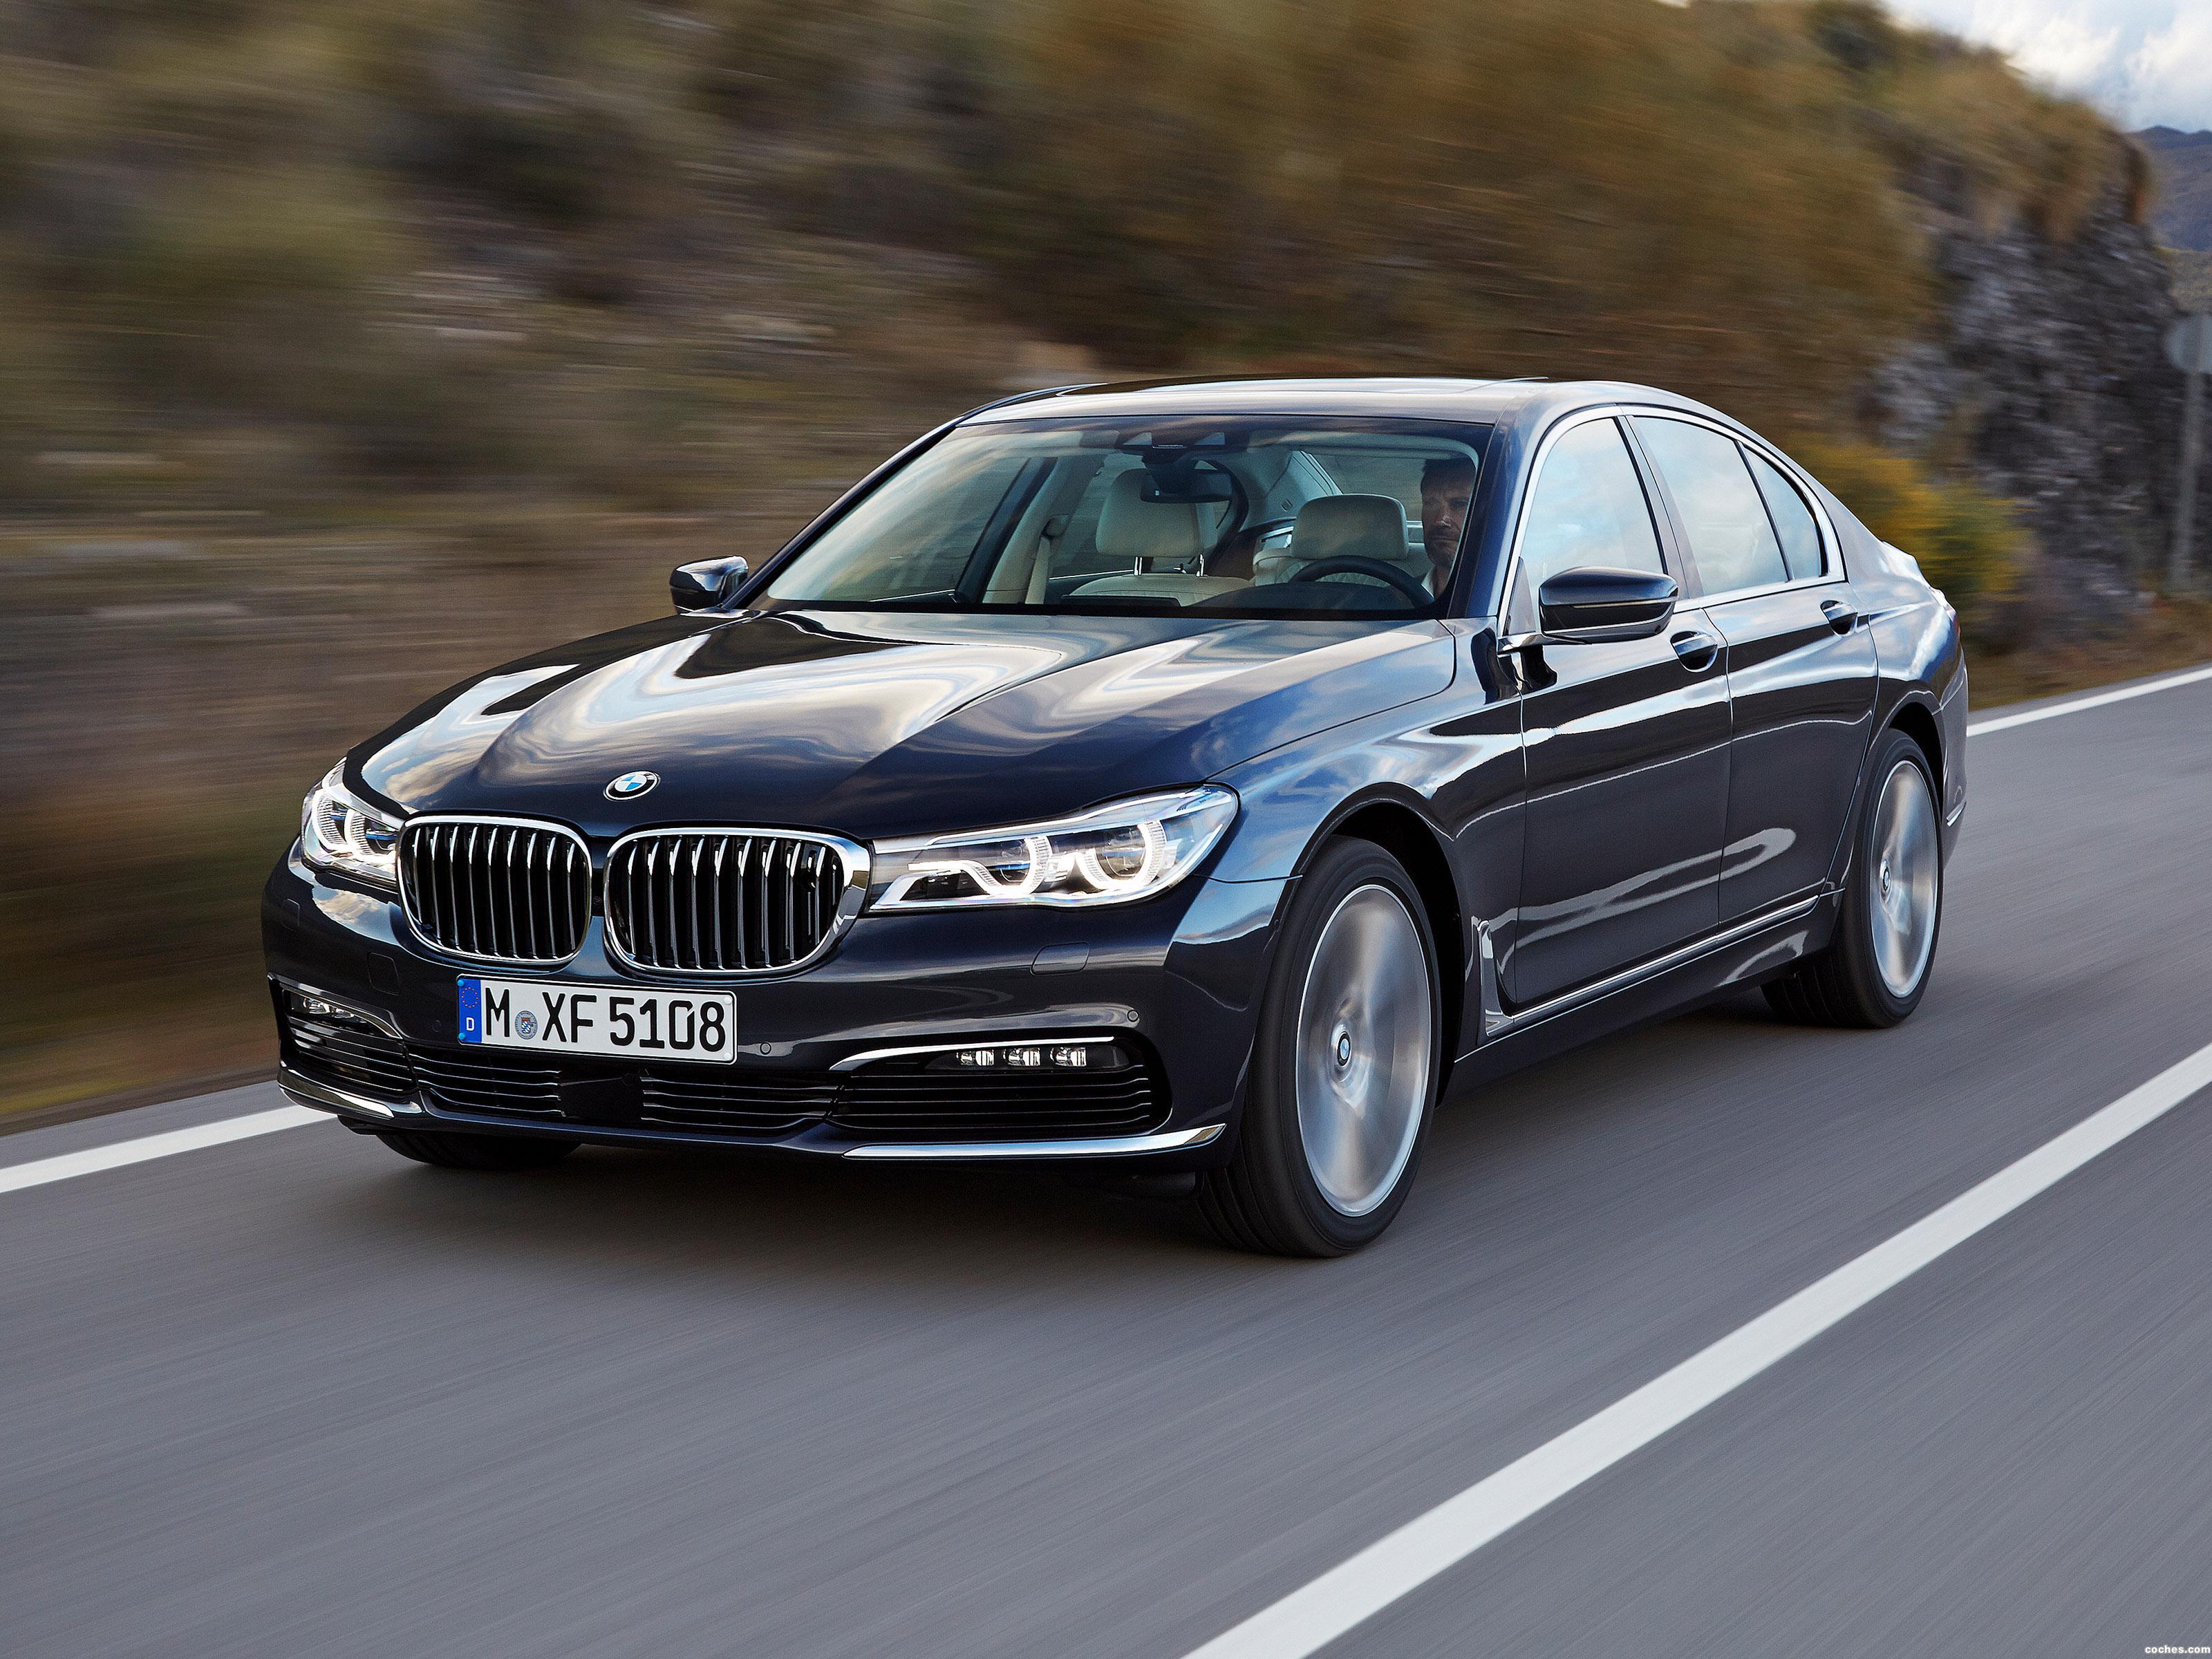 BMW 7 Series (G11) exterior specifications